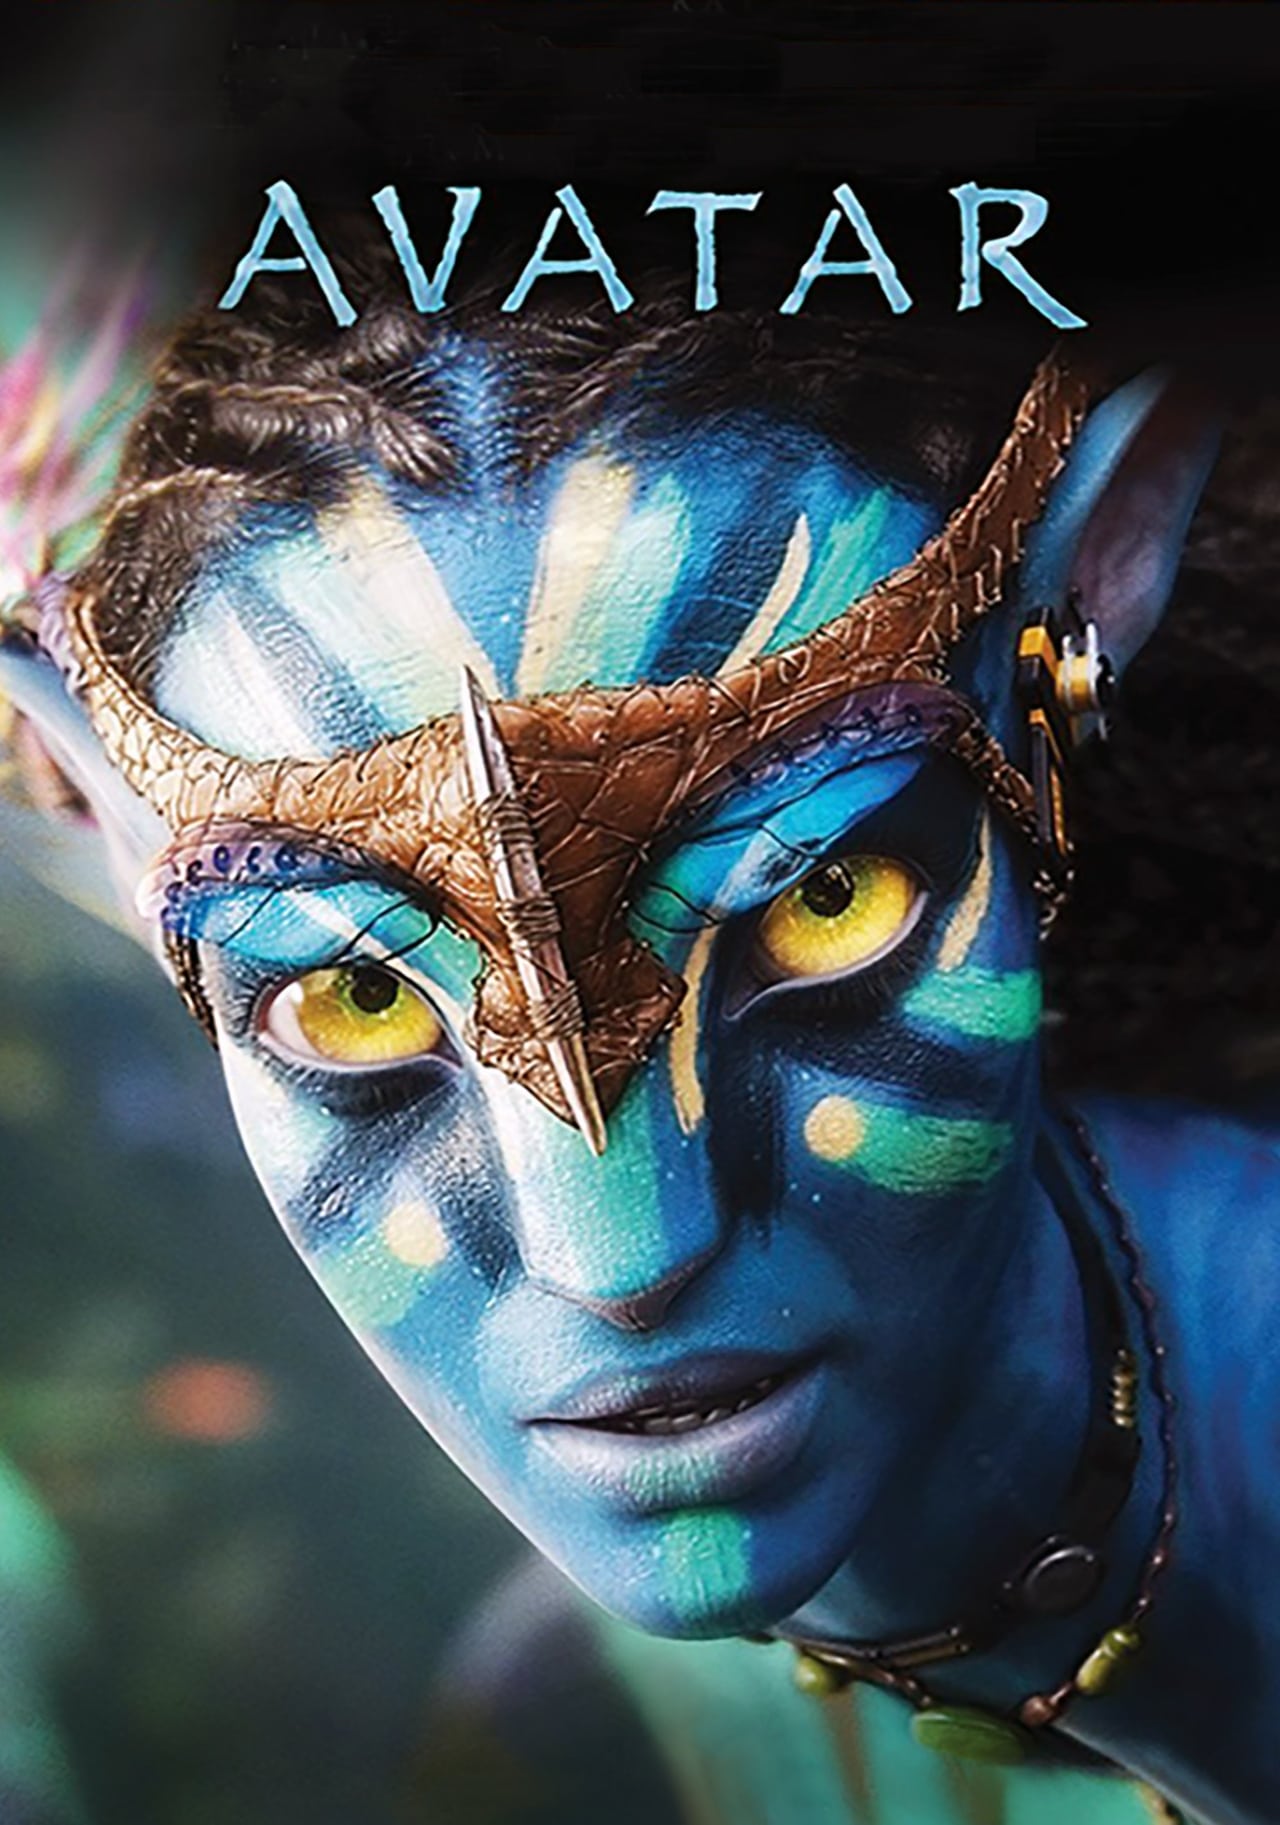 movie review about avatar